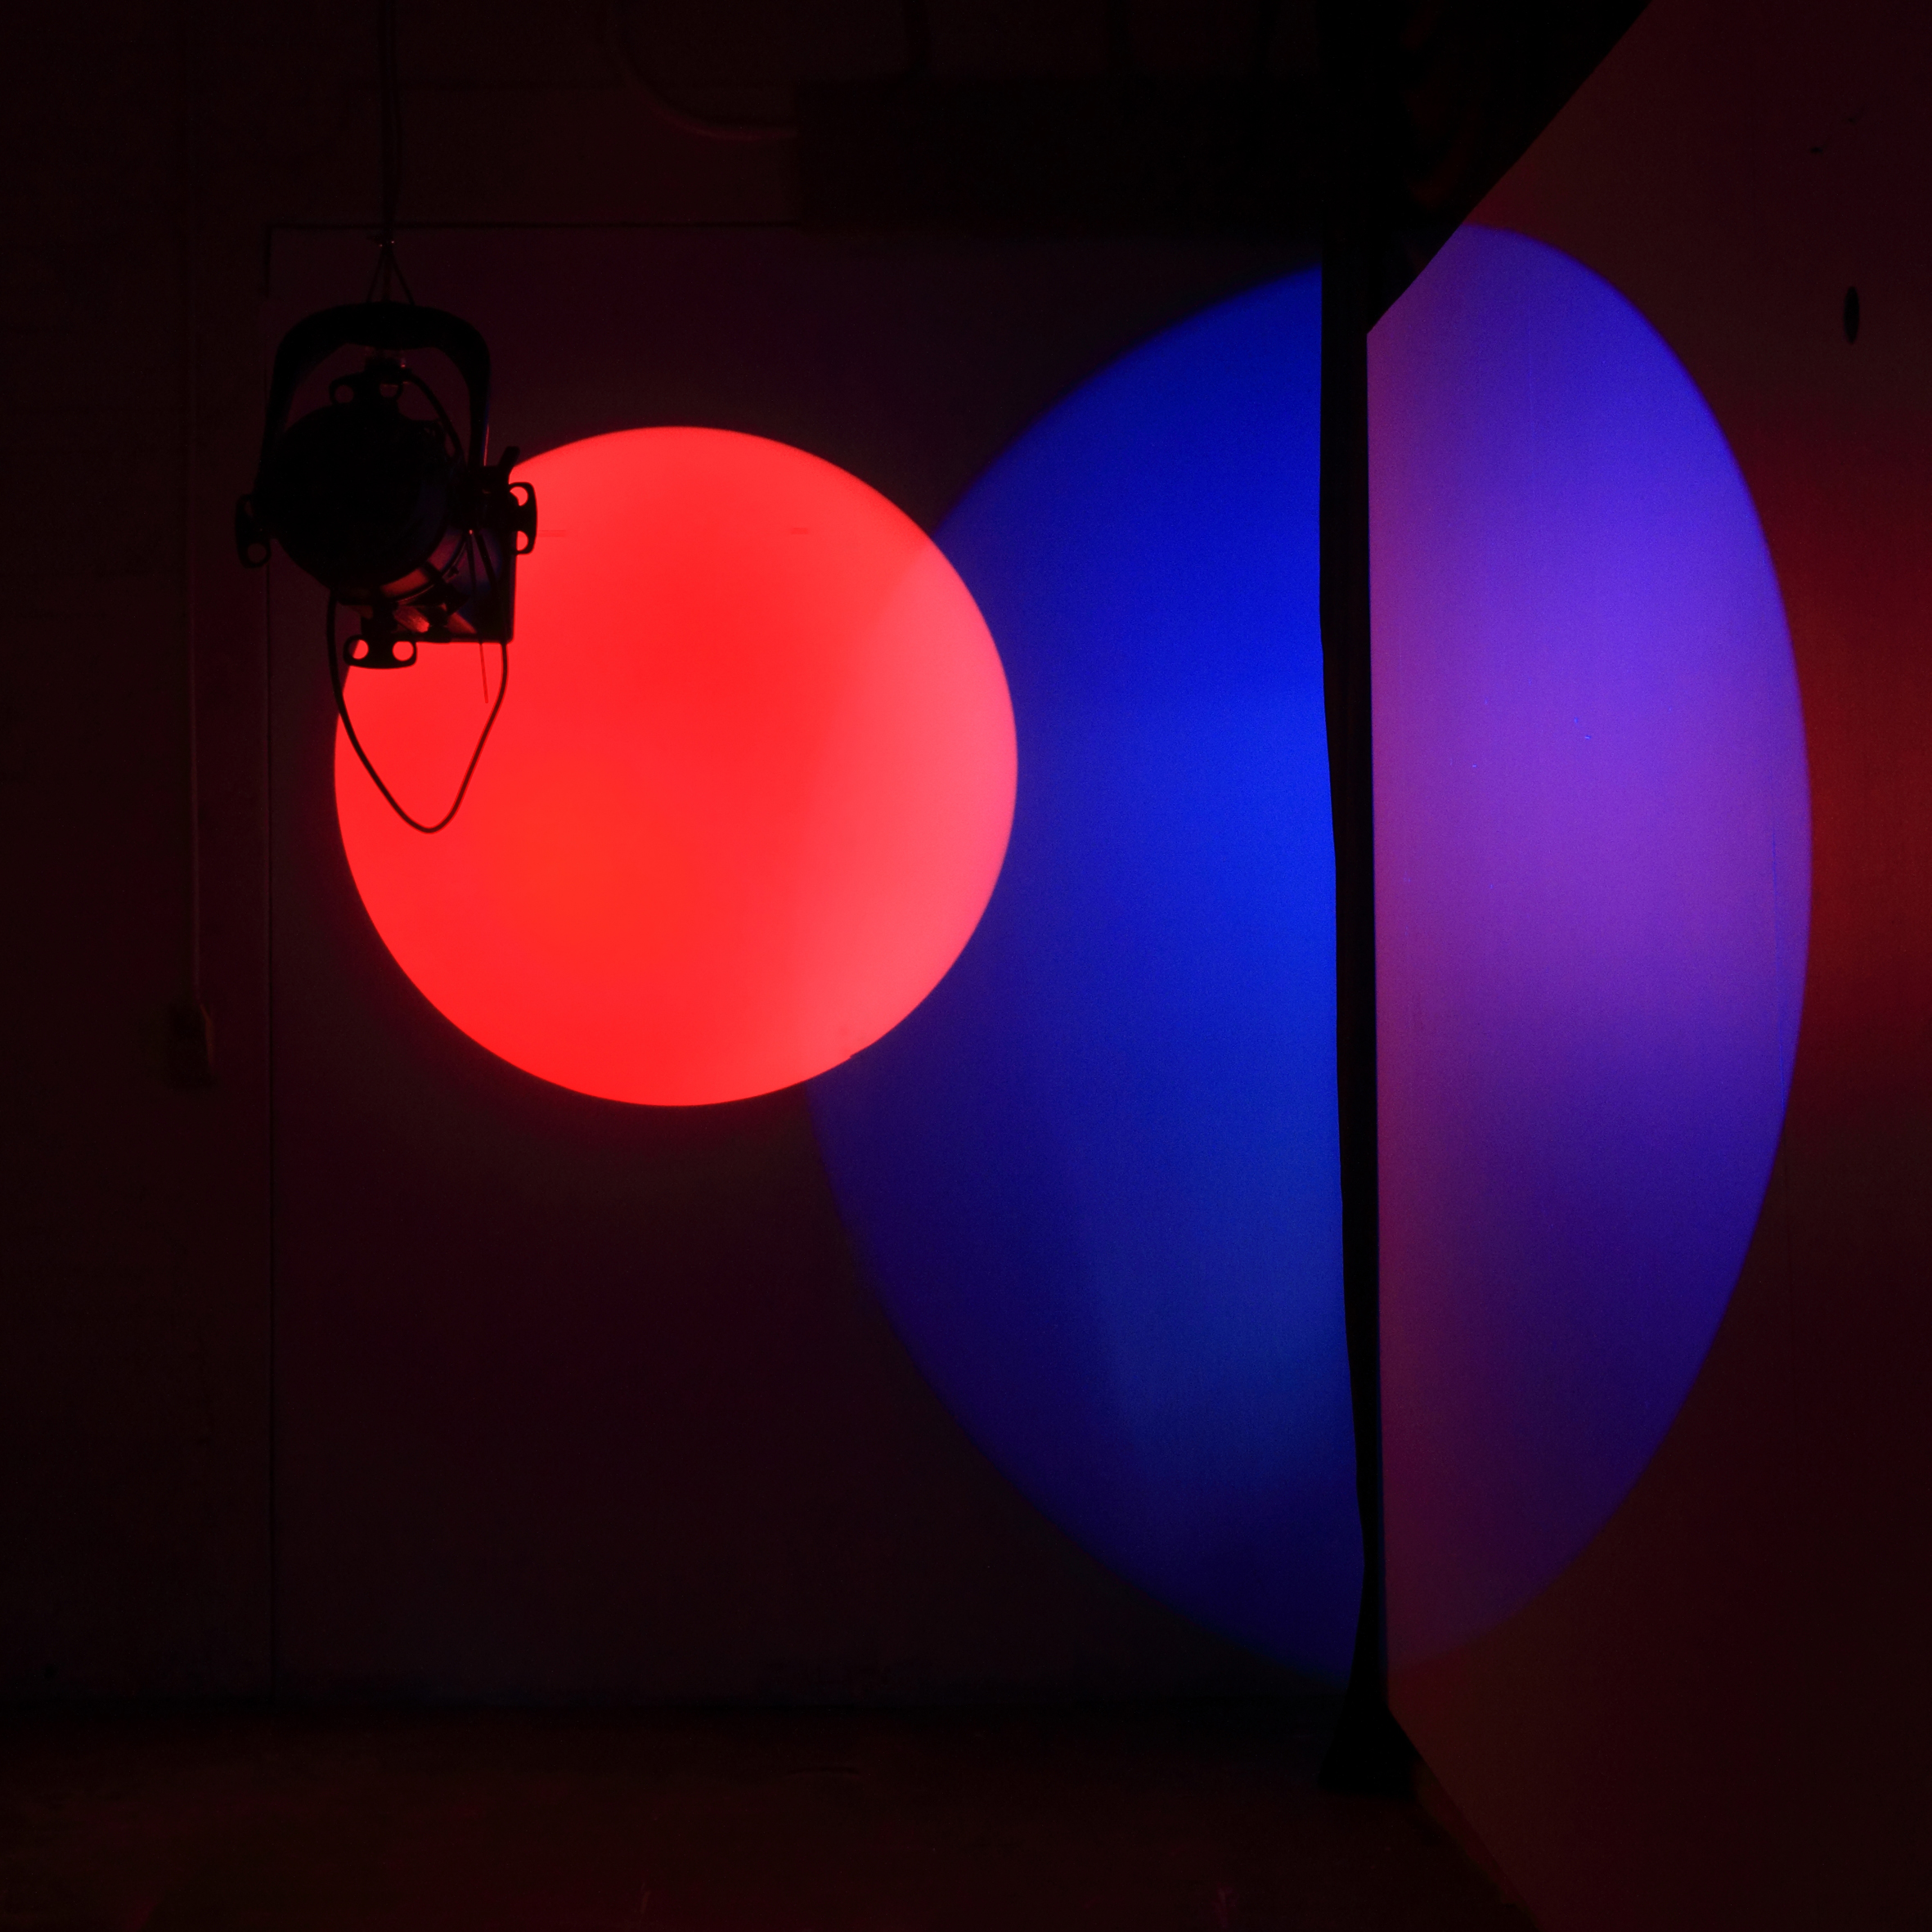 Two large spots of light, red and blue.